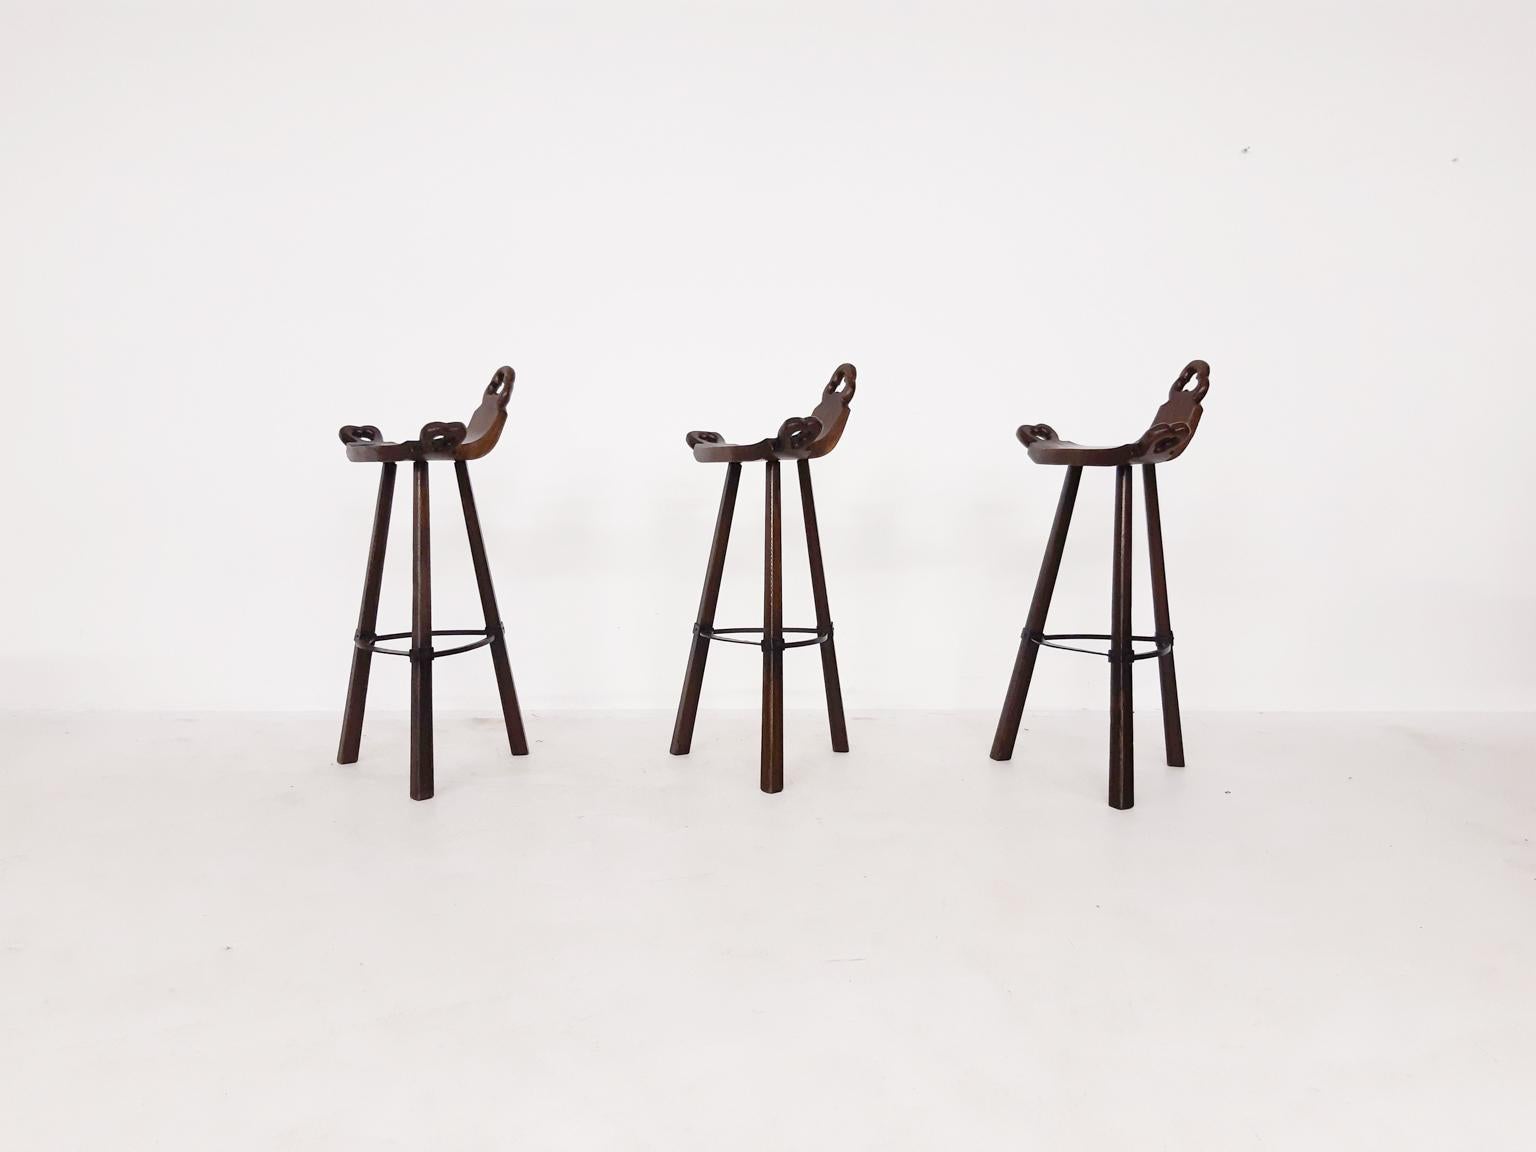 Set of 3 midcentury Brutalist Spanish bar stools. 

Made of wood with a metal footrest.

In good vintage condition.